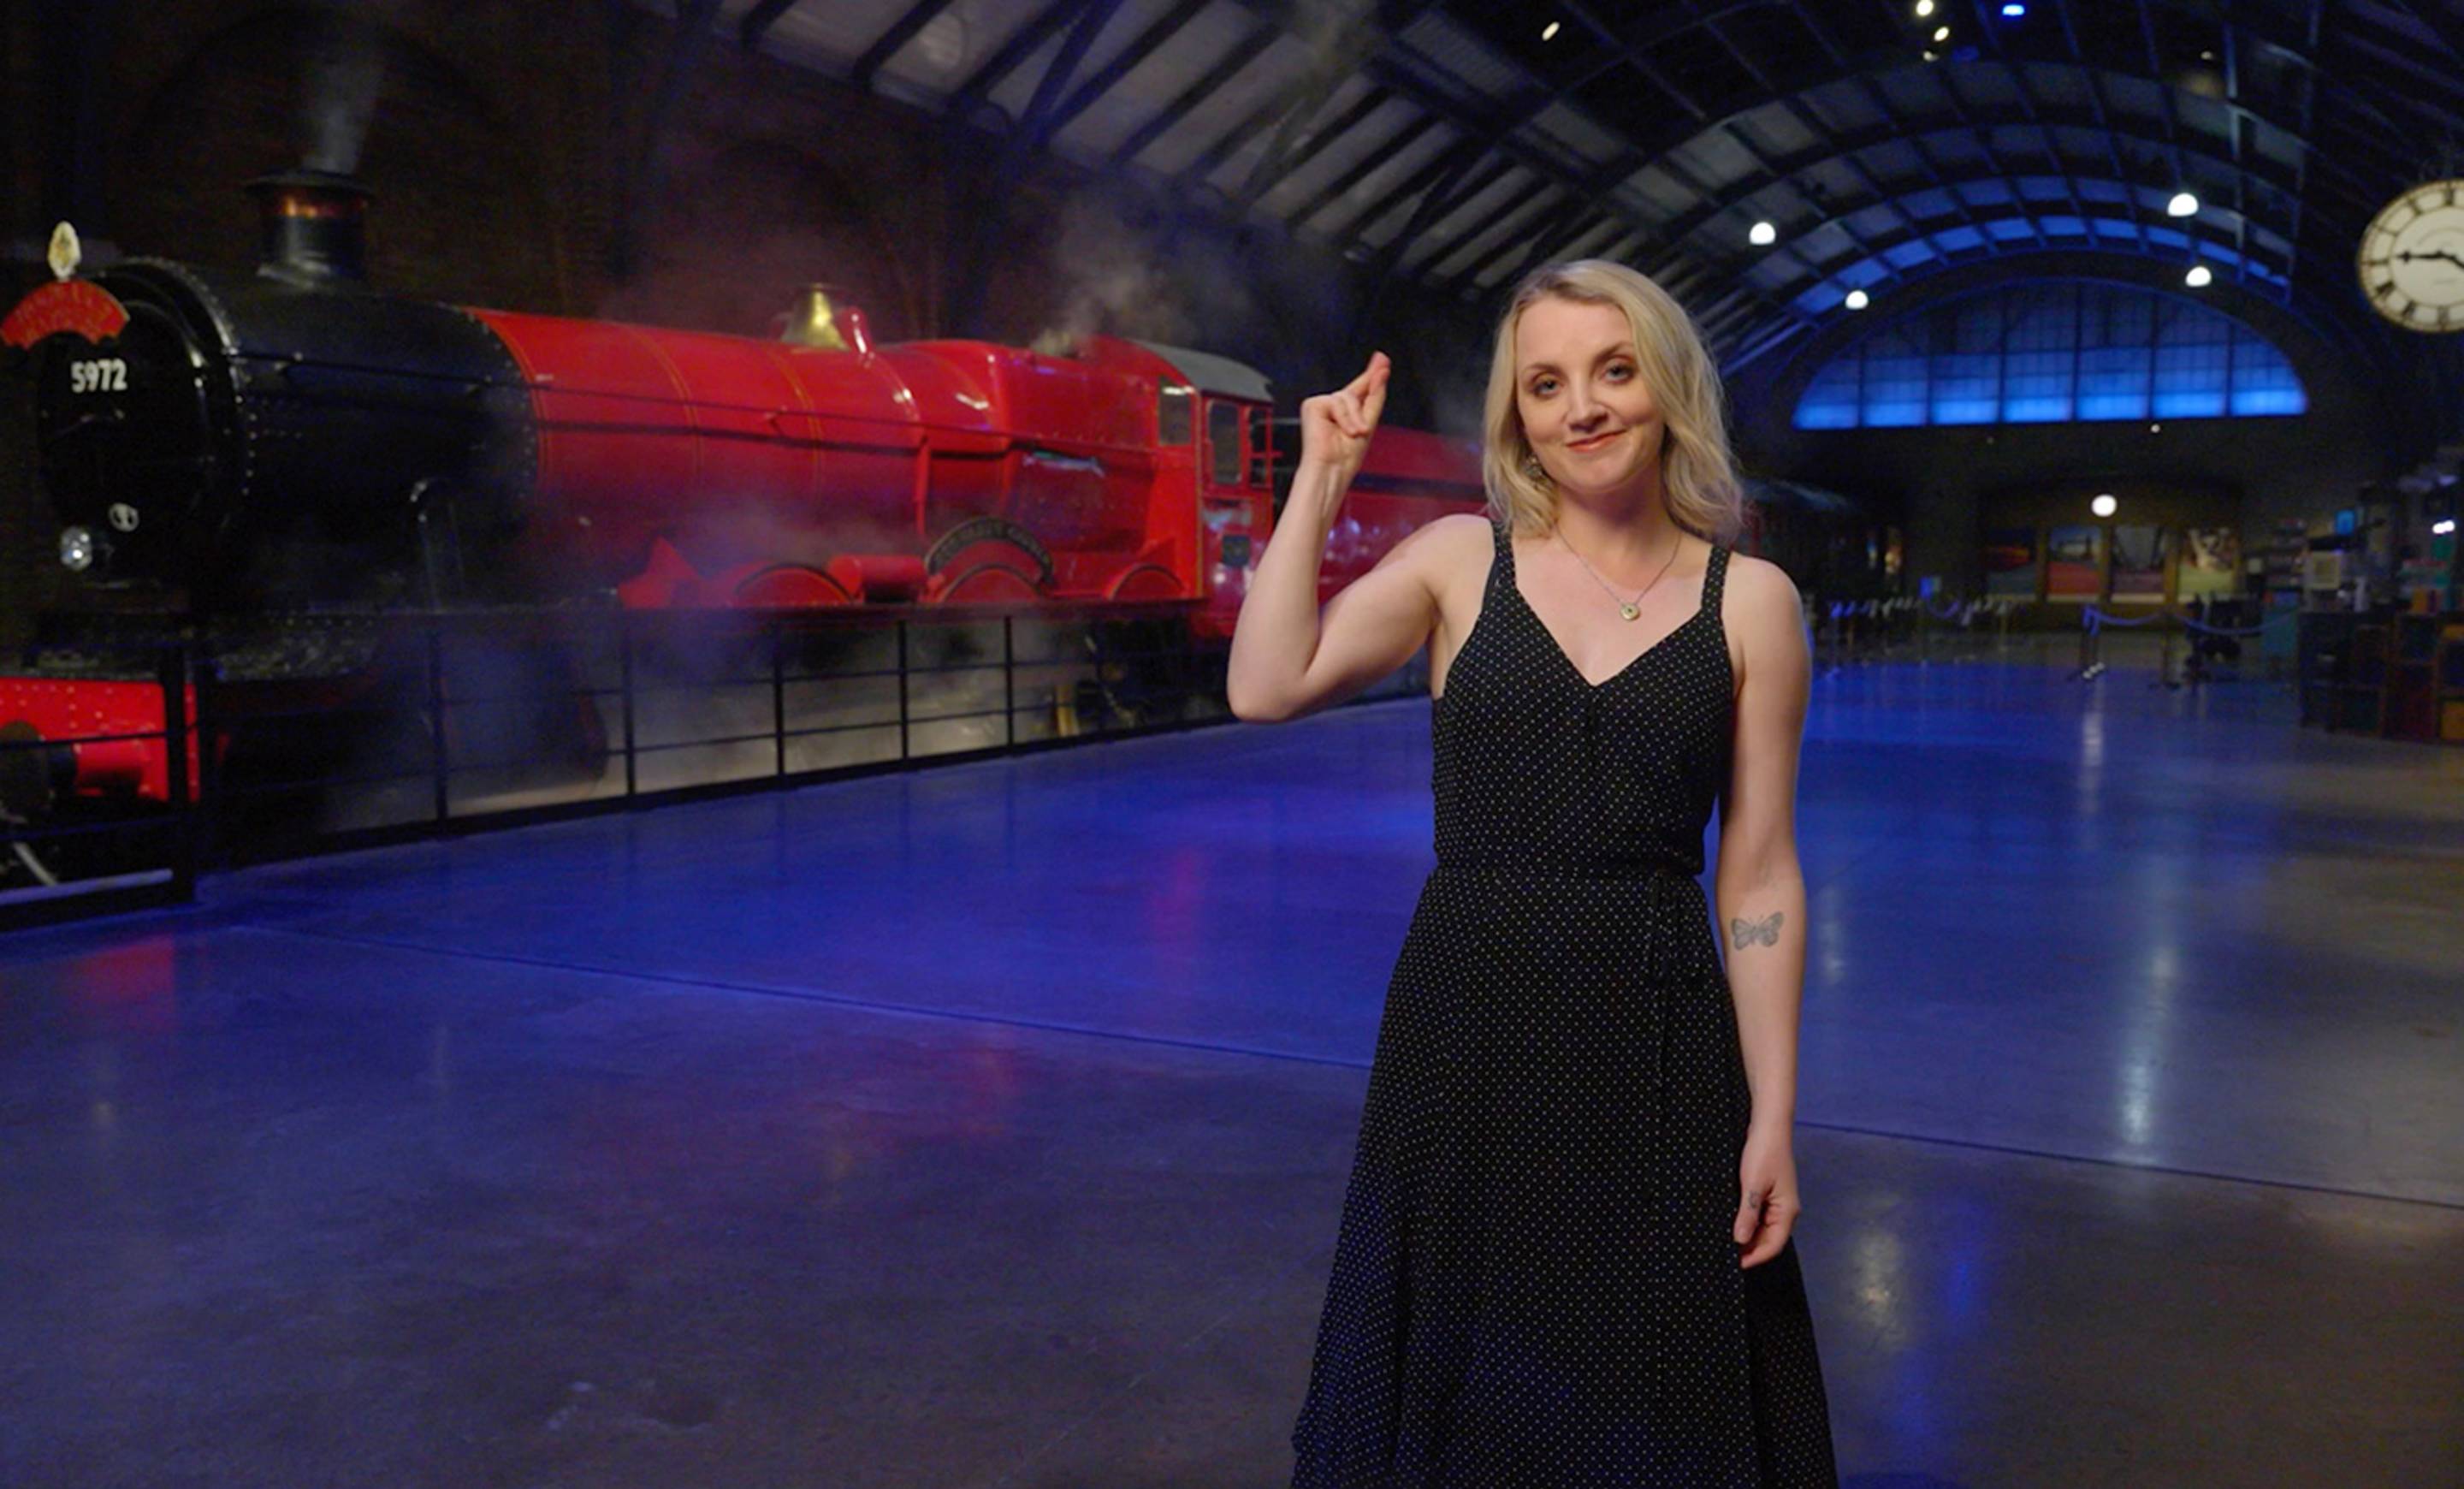 Join Evanna Lynch for a virtual lesson